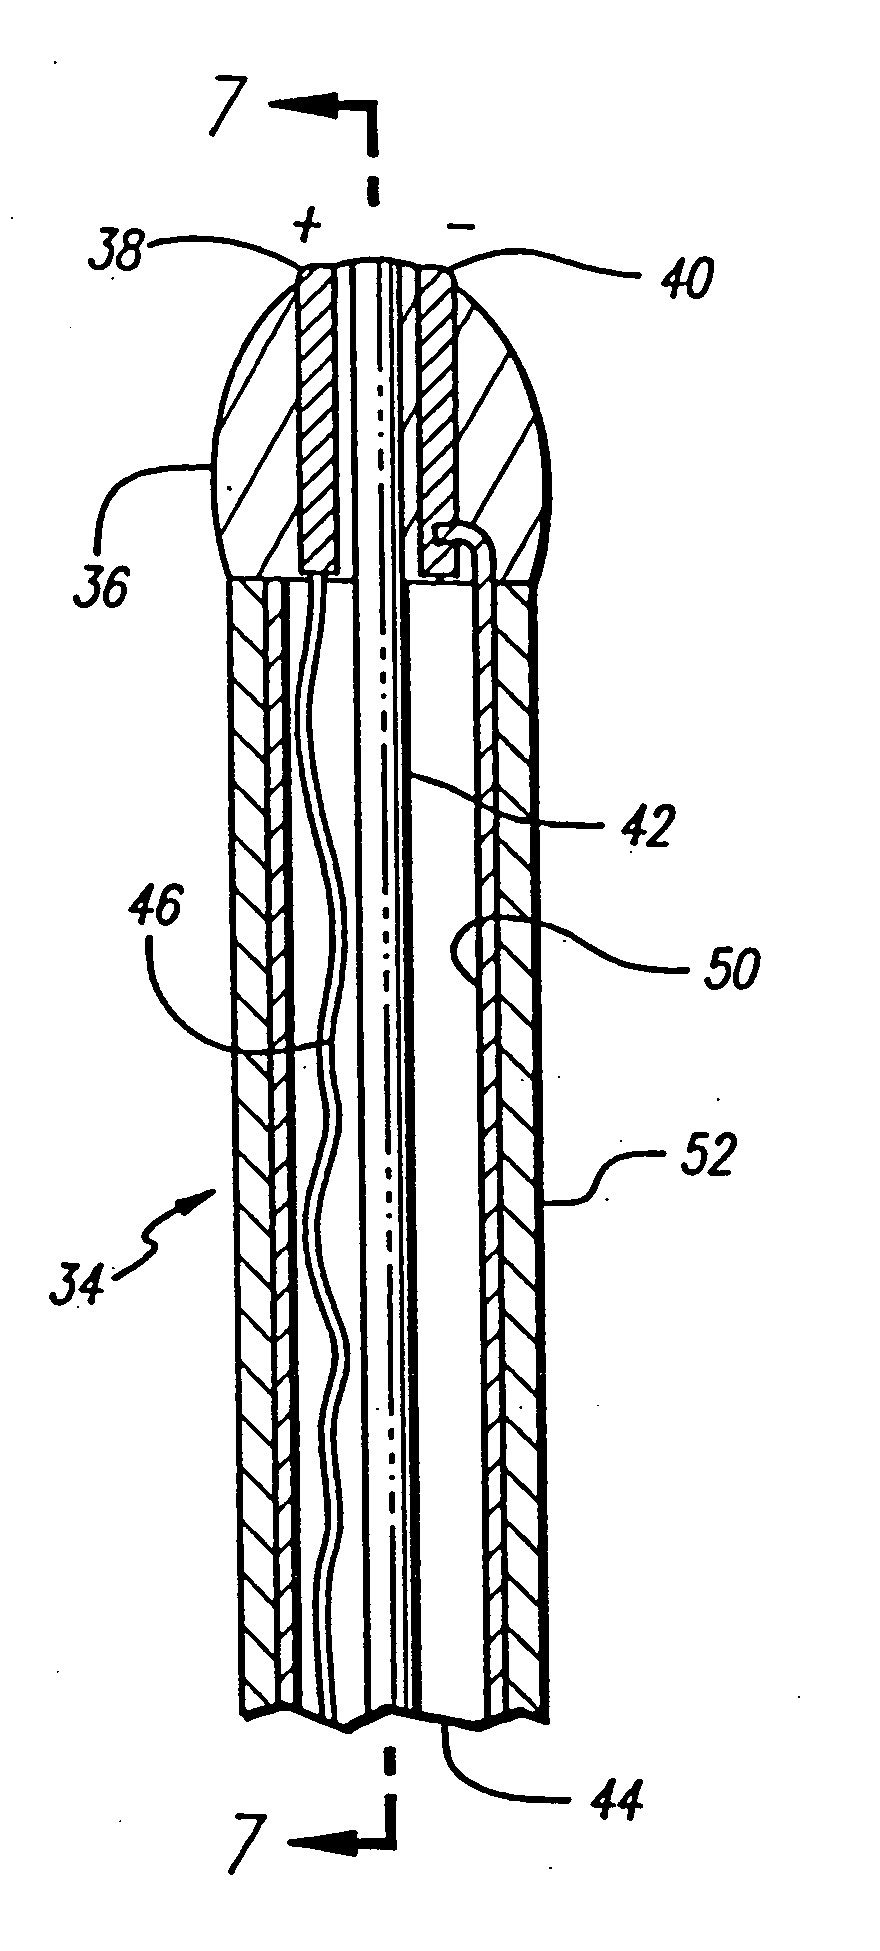 Method for treating venous insufficiency using directionally applied energy